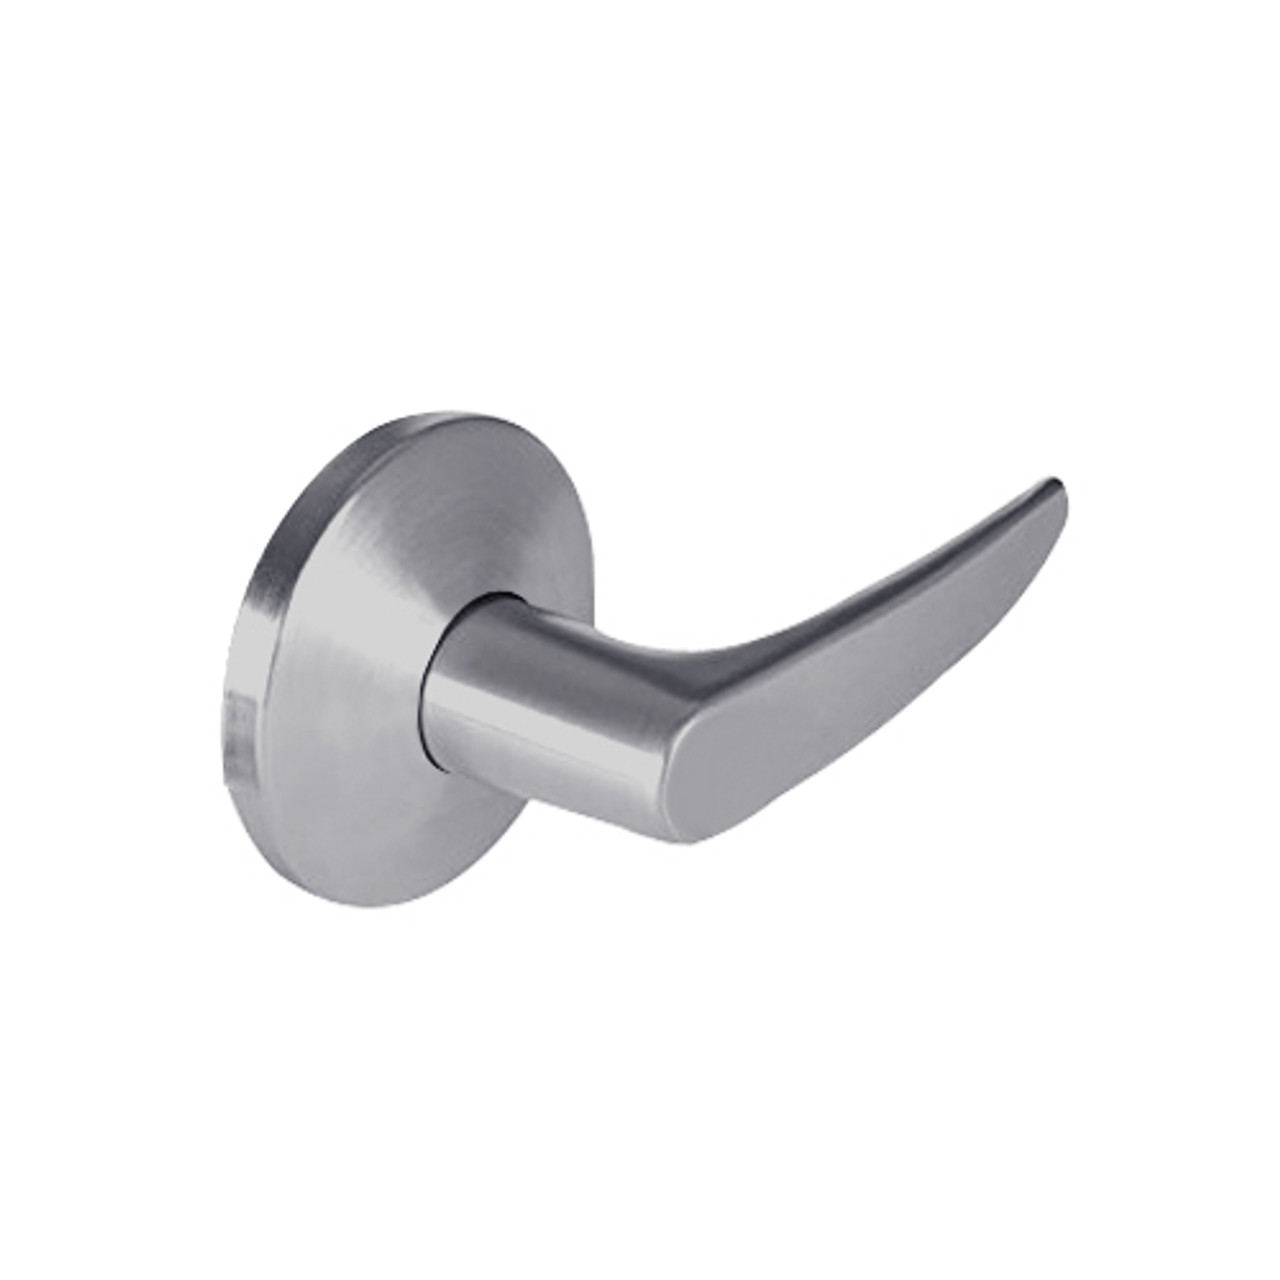 9K30LL16LS3626 Best 9K Series Hospital Privacy Heavy Duty Cylindrical Lever Locks with Curved Without Return Lever Design in Satin Chrome